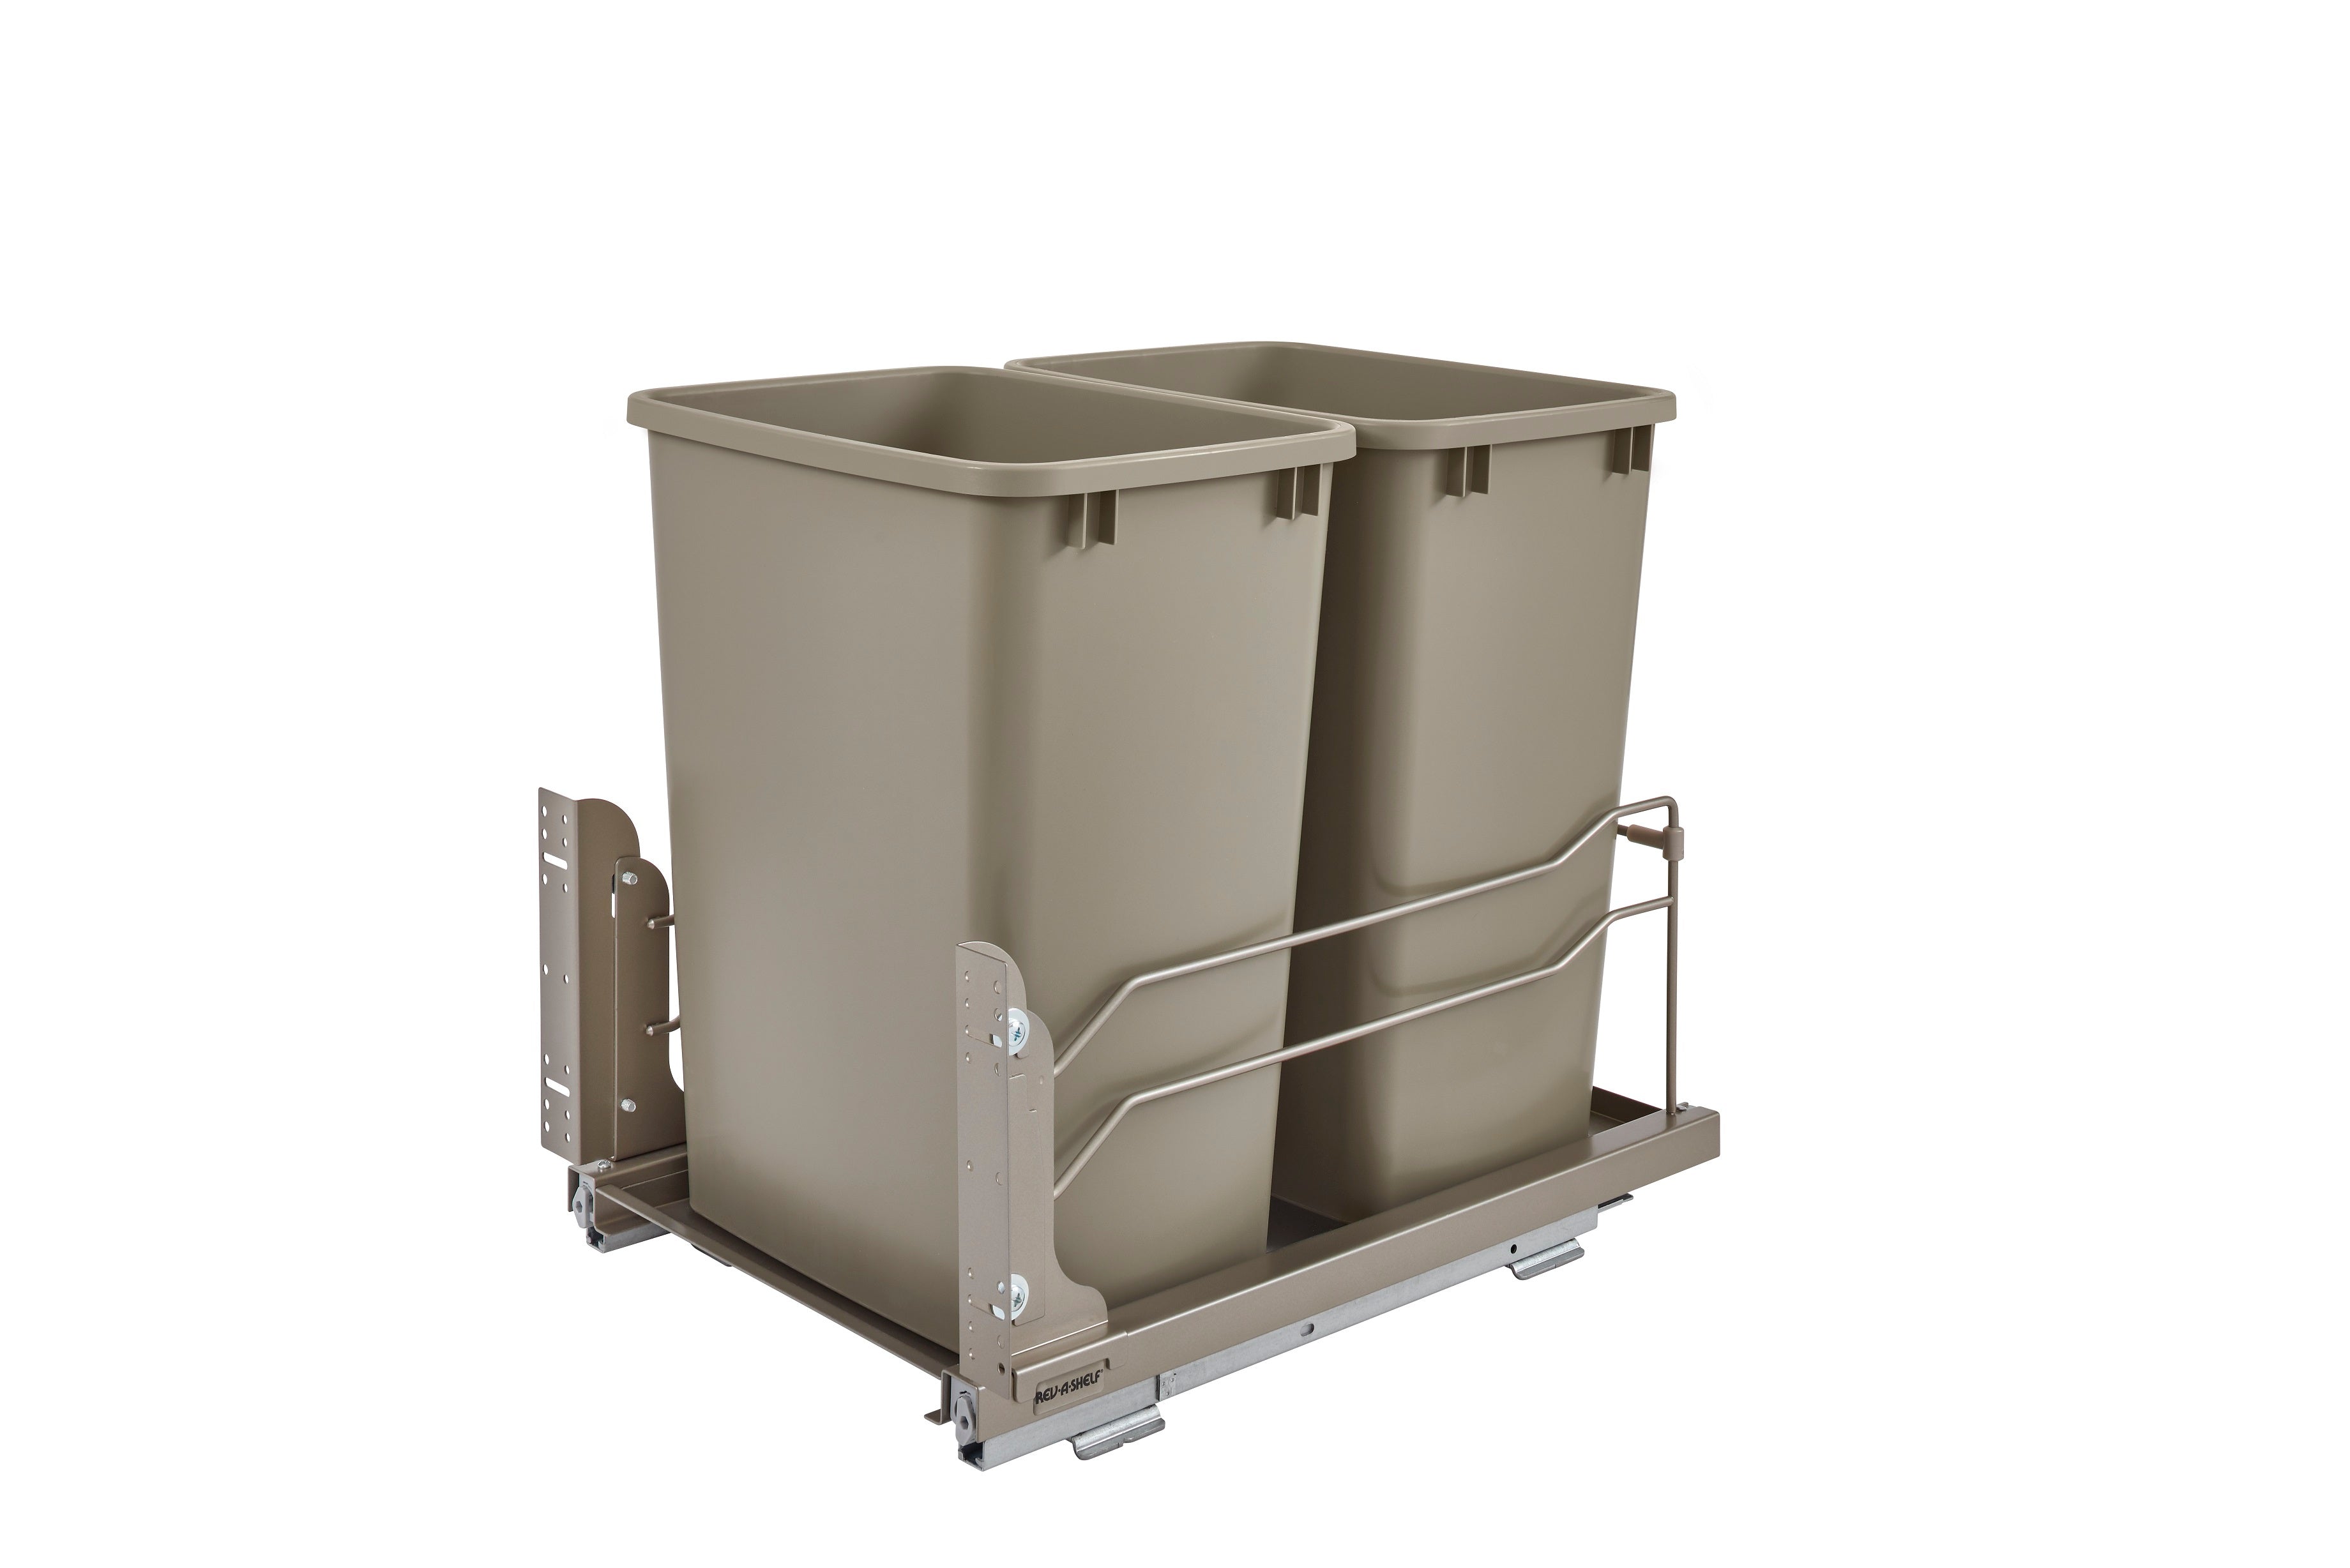 Rev-A-Shelf 35-Quart Soft Close Double Pull Out Trash Can in the